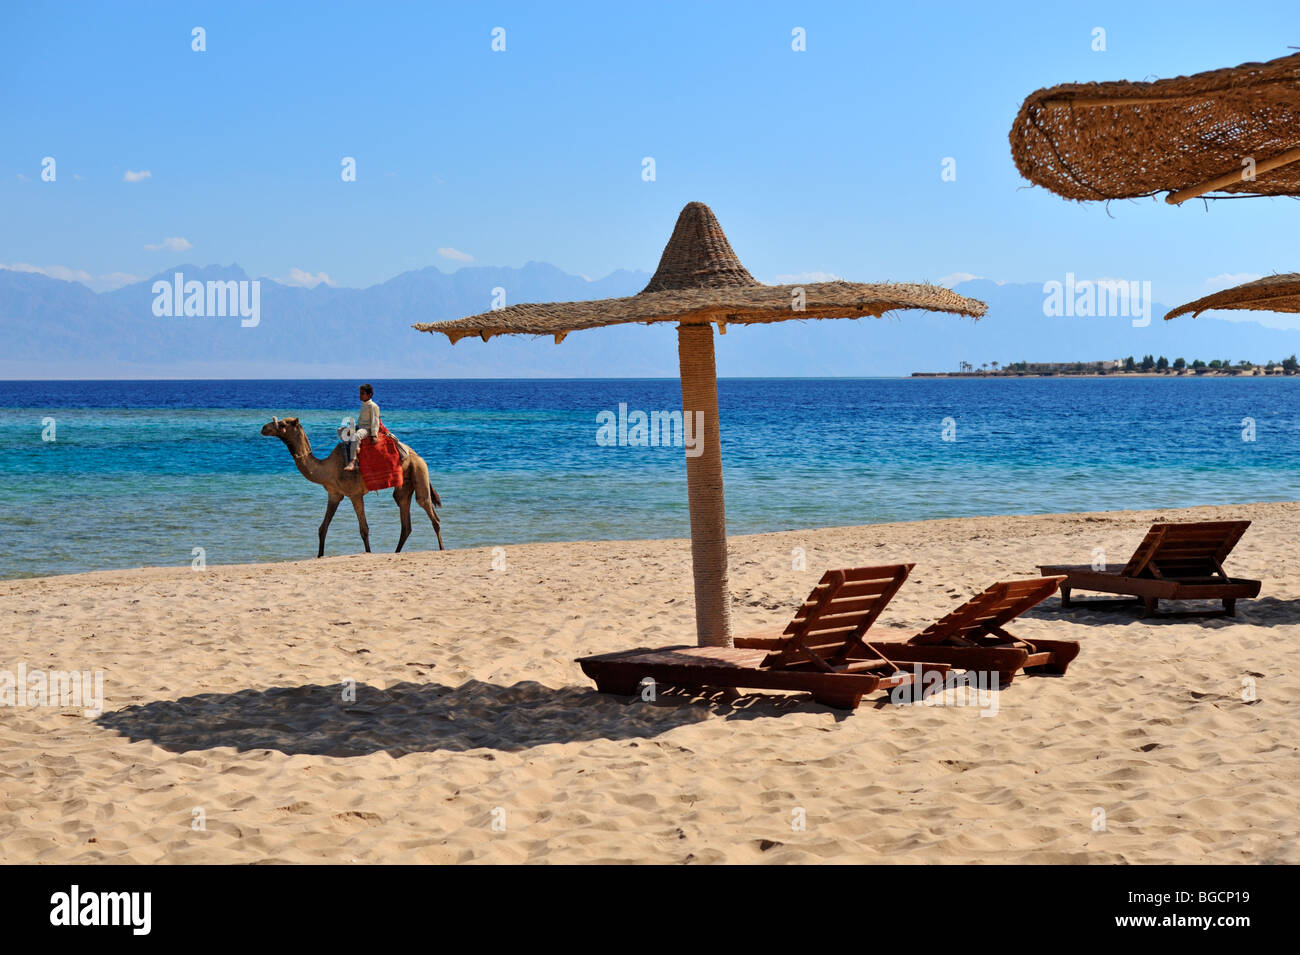 'Red Sea' beach with thatched umbrellas, sunbeds and camel Stock Photo